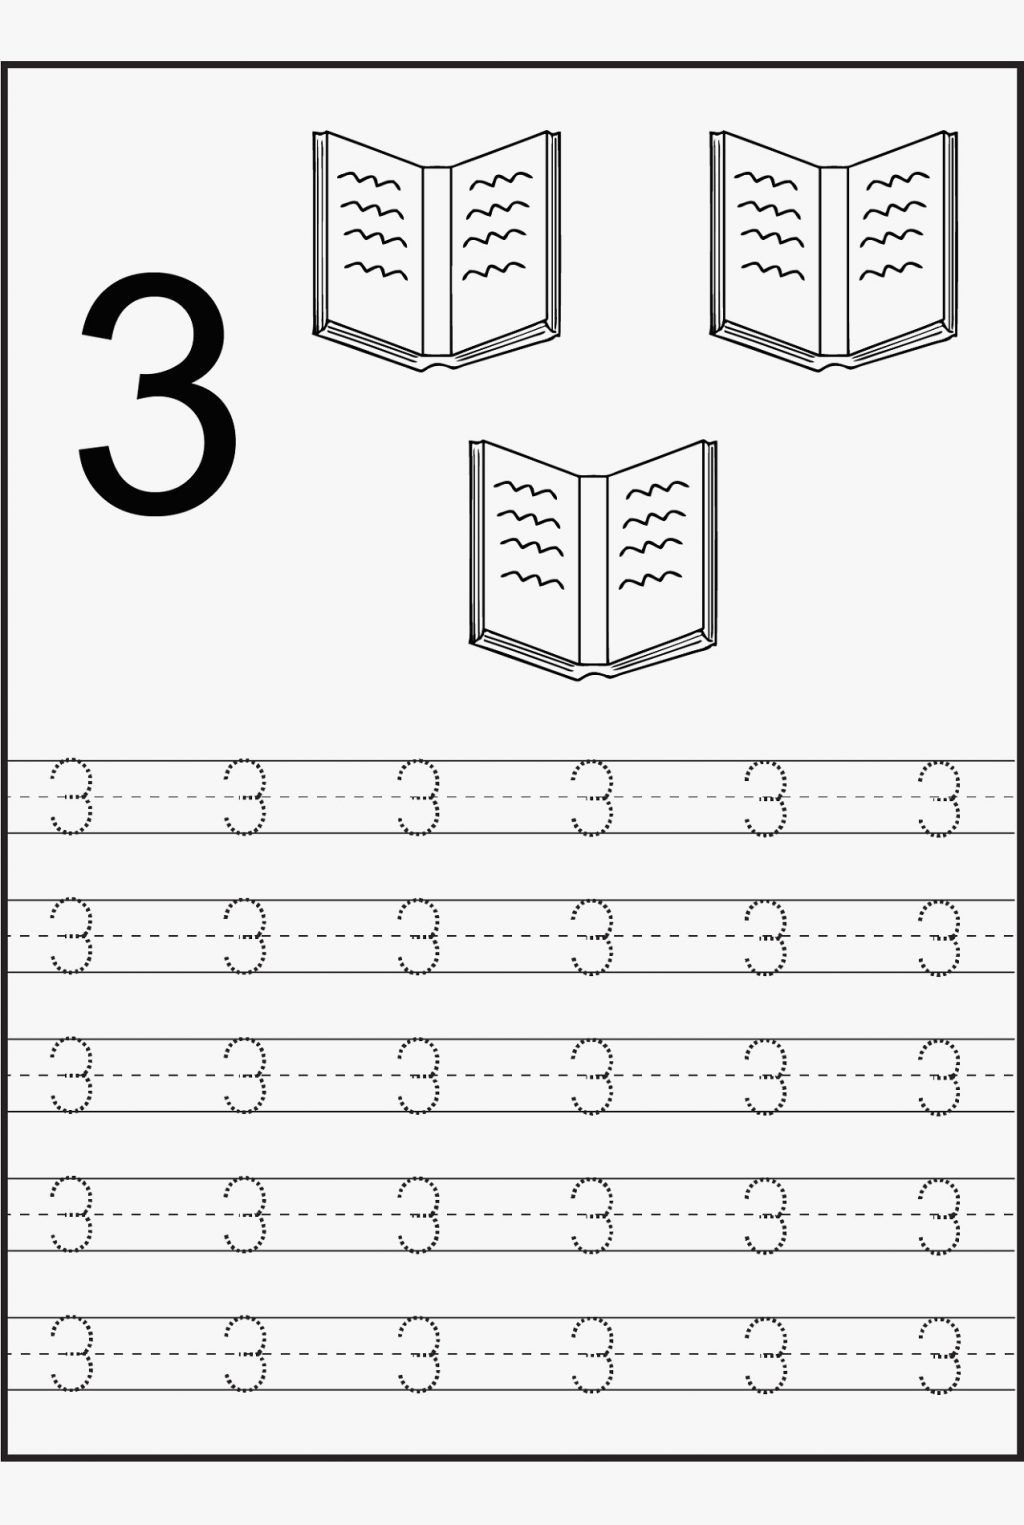 Worksheets For Three Ar Olds Alphabet Tracing Pdf Printable inside Alphabet Tracing Worksheets For 4 Year Olds